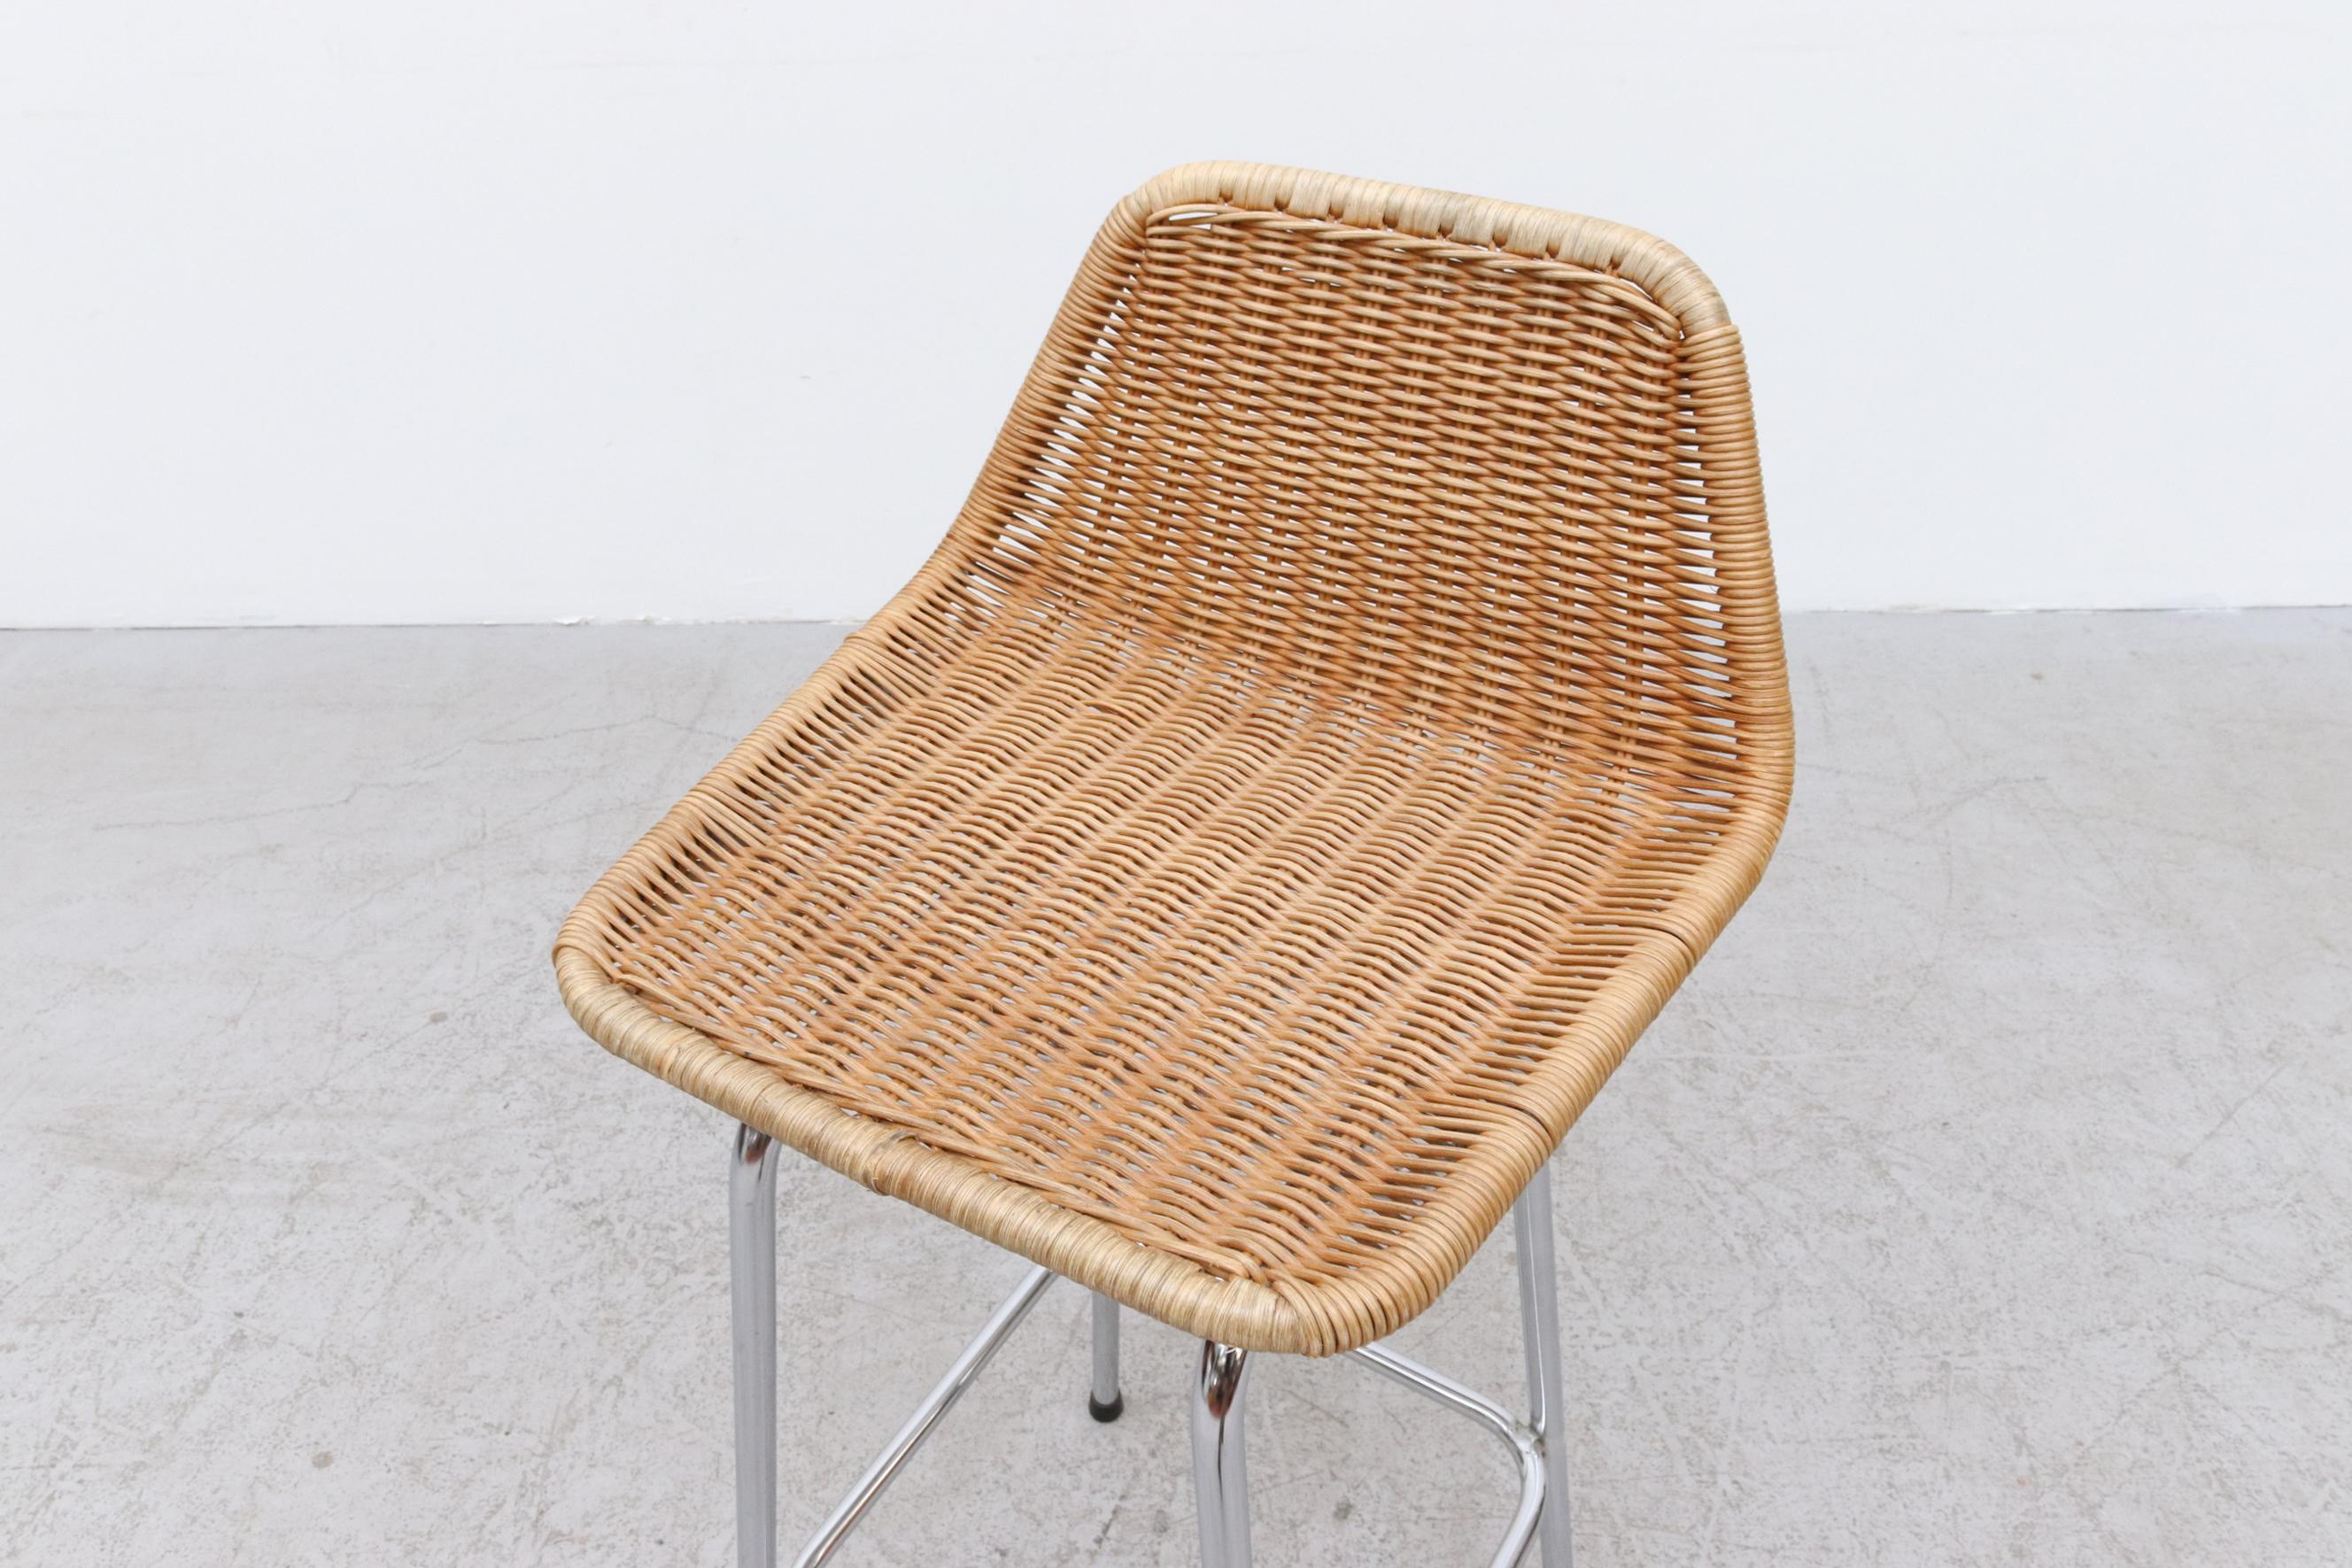 Dutch Charlotte Perriand Style Wicker Bar Stools with Angeled Back